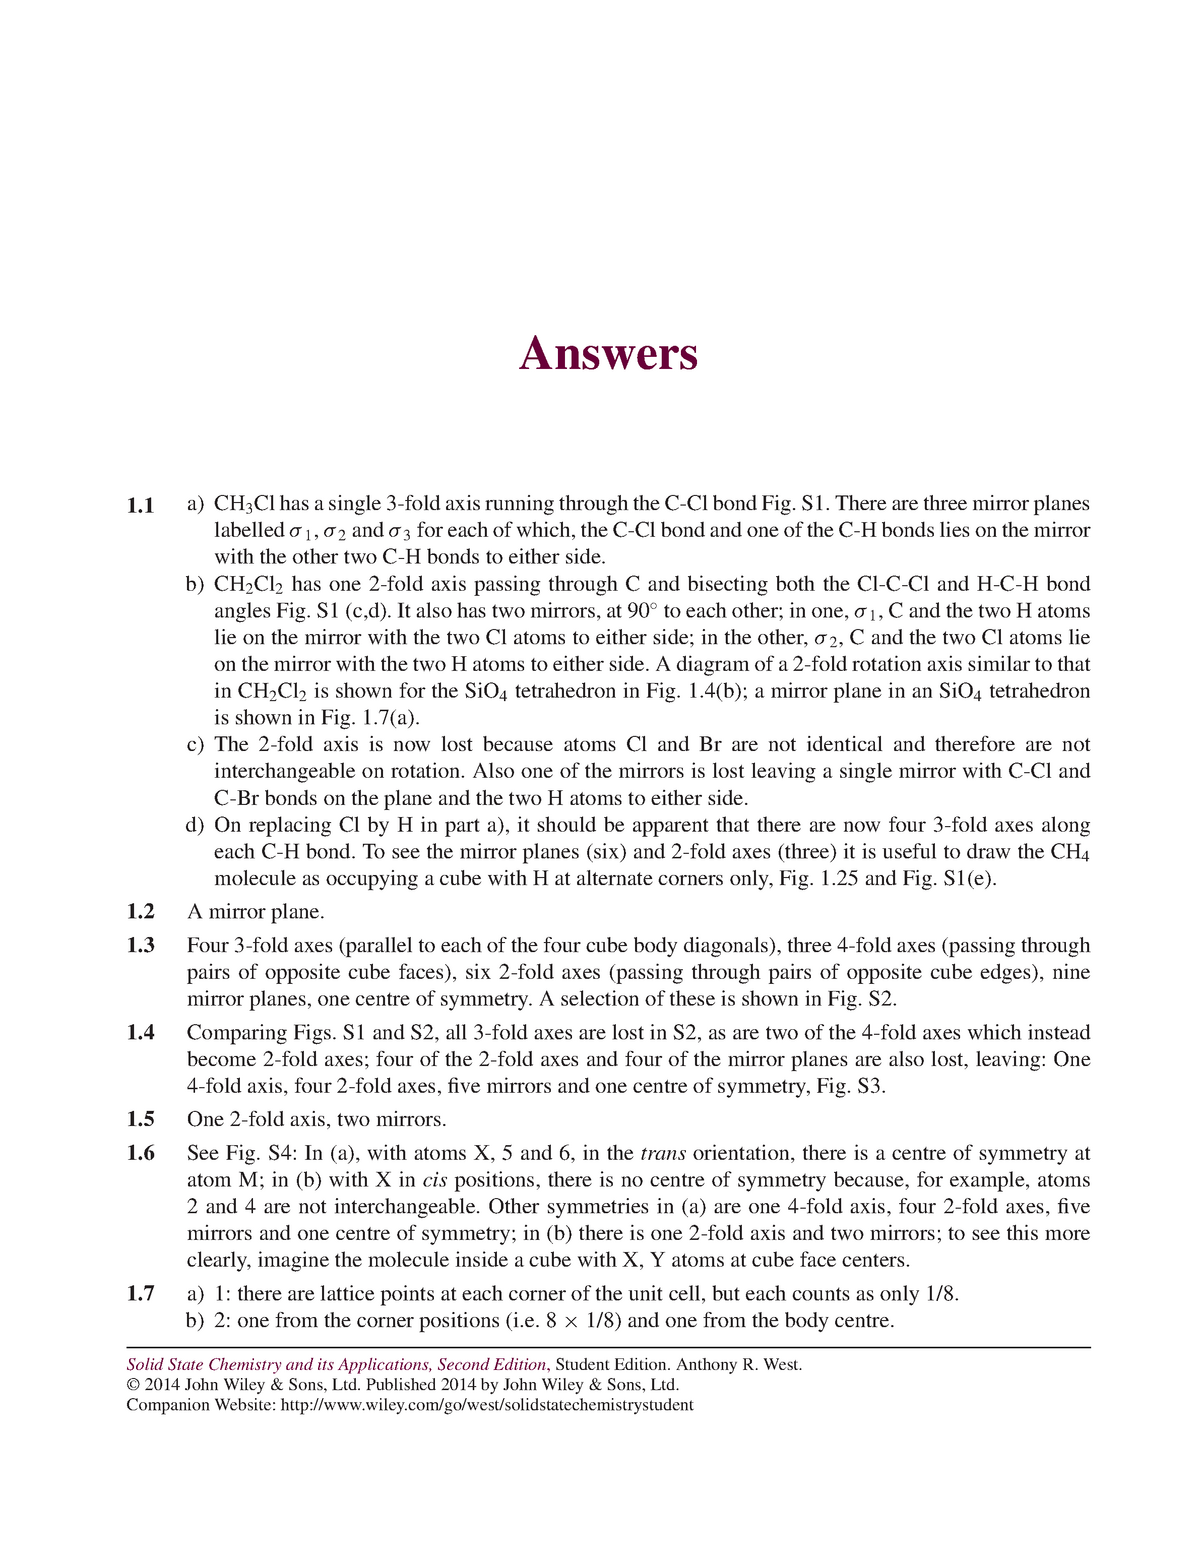 Solid state chemistry and it applications - Answers 1 1 1 a) CH3